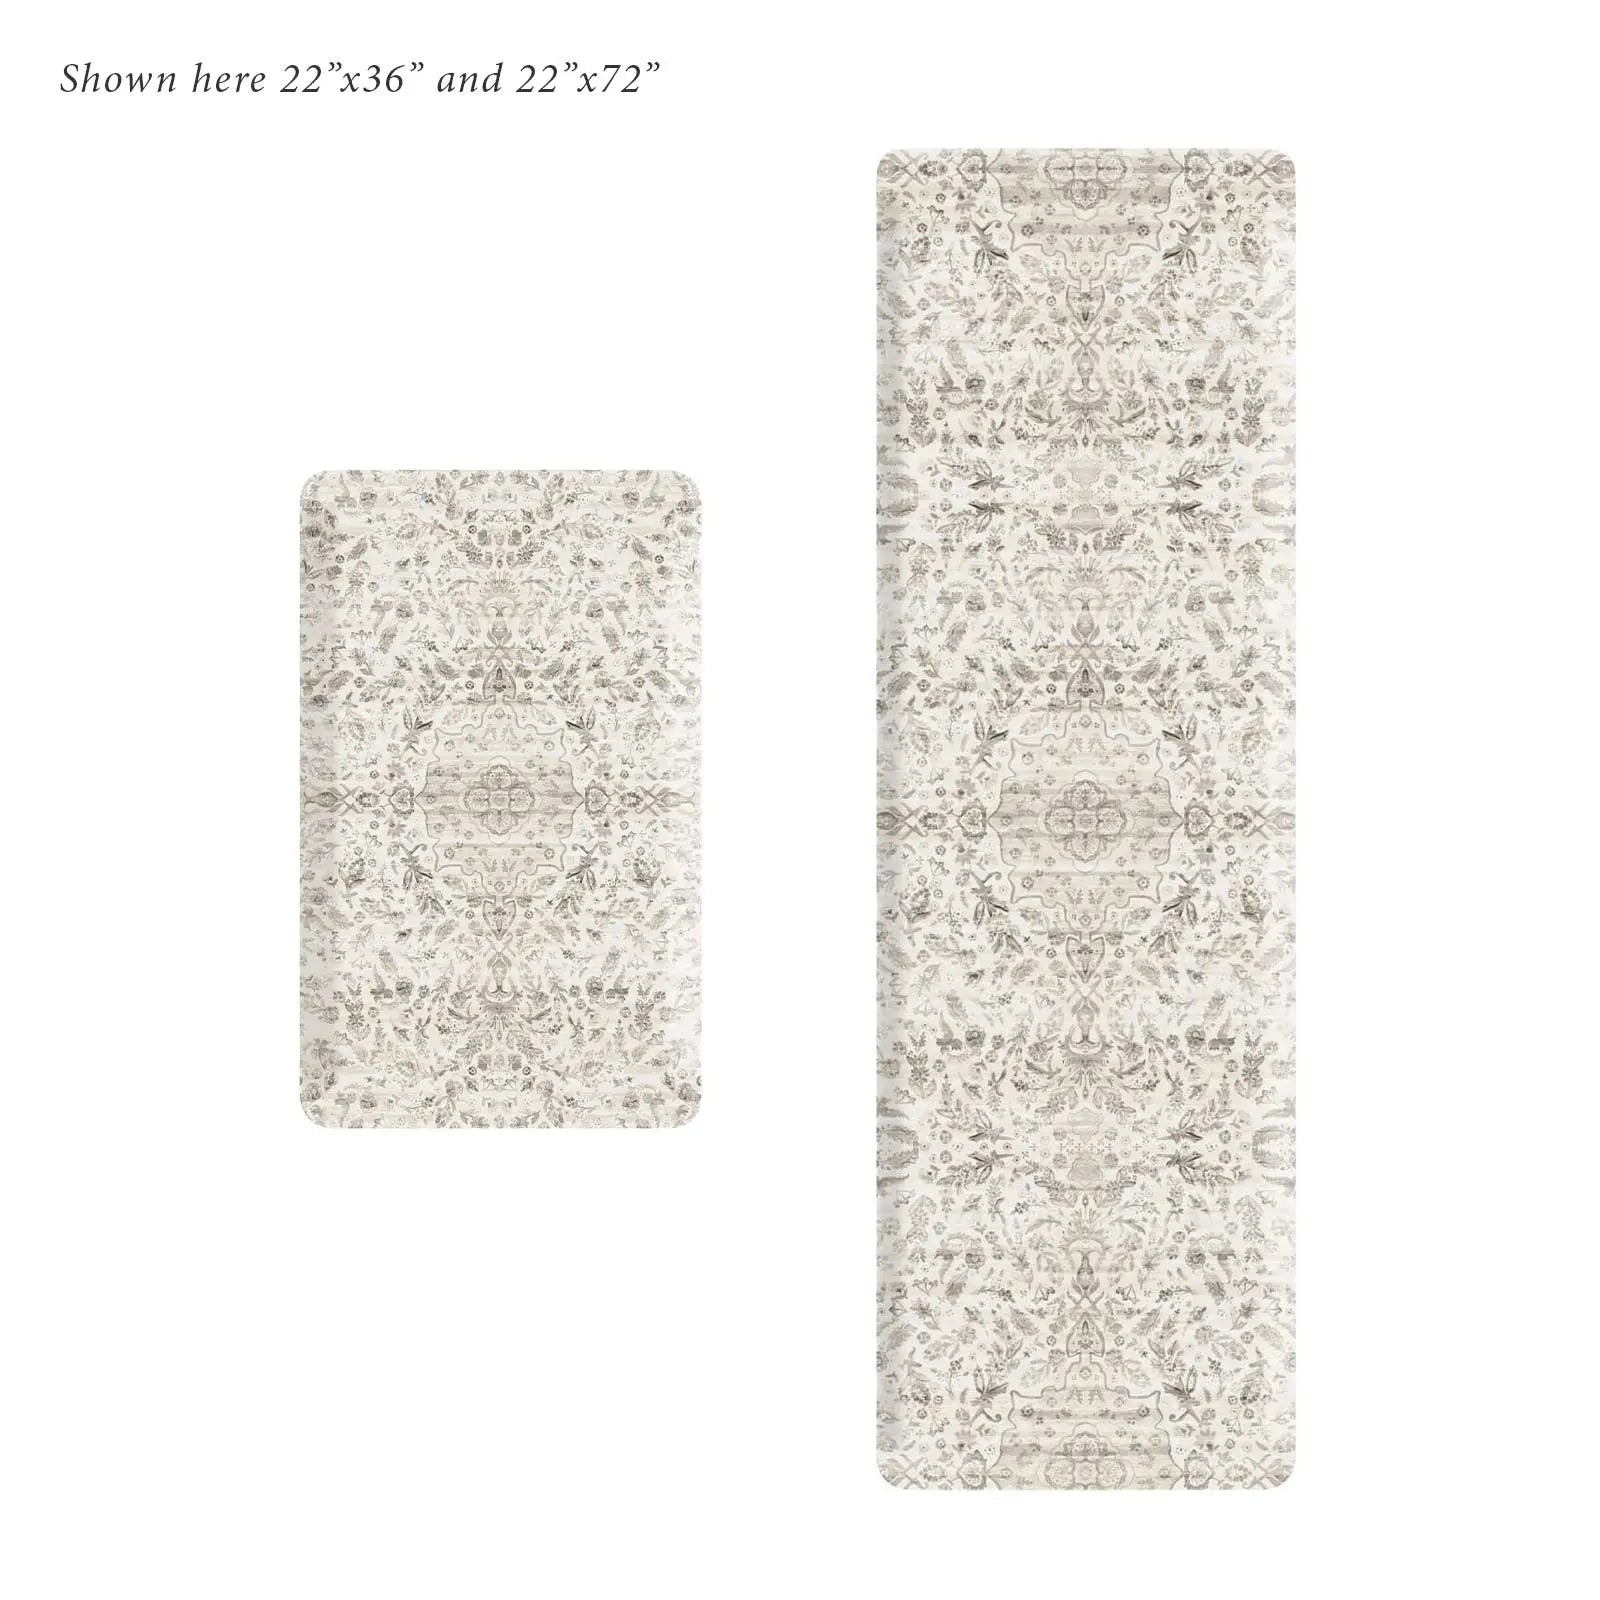 Emile latte beige and gray floral boho kitchen mat shown in sizes 22x36 and 22x72